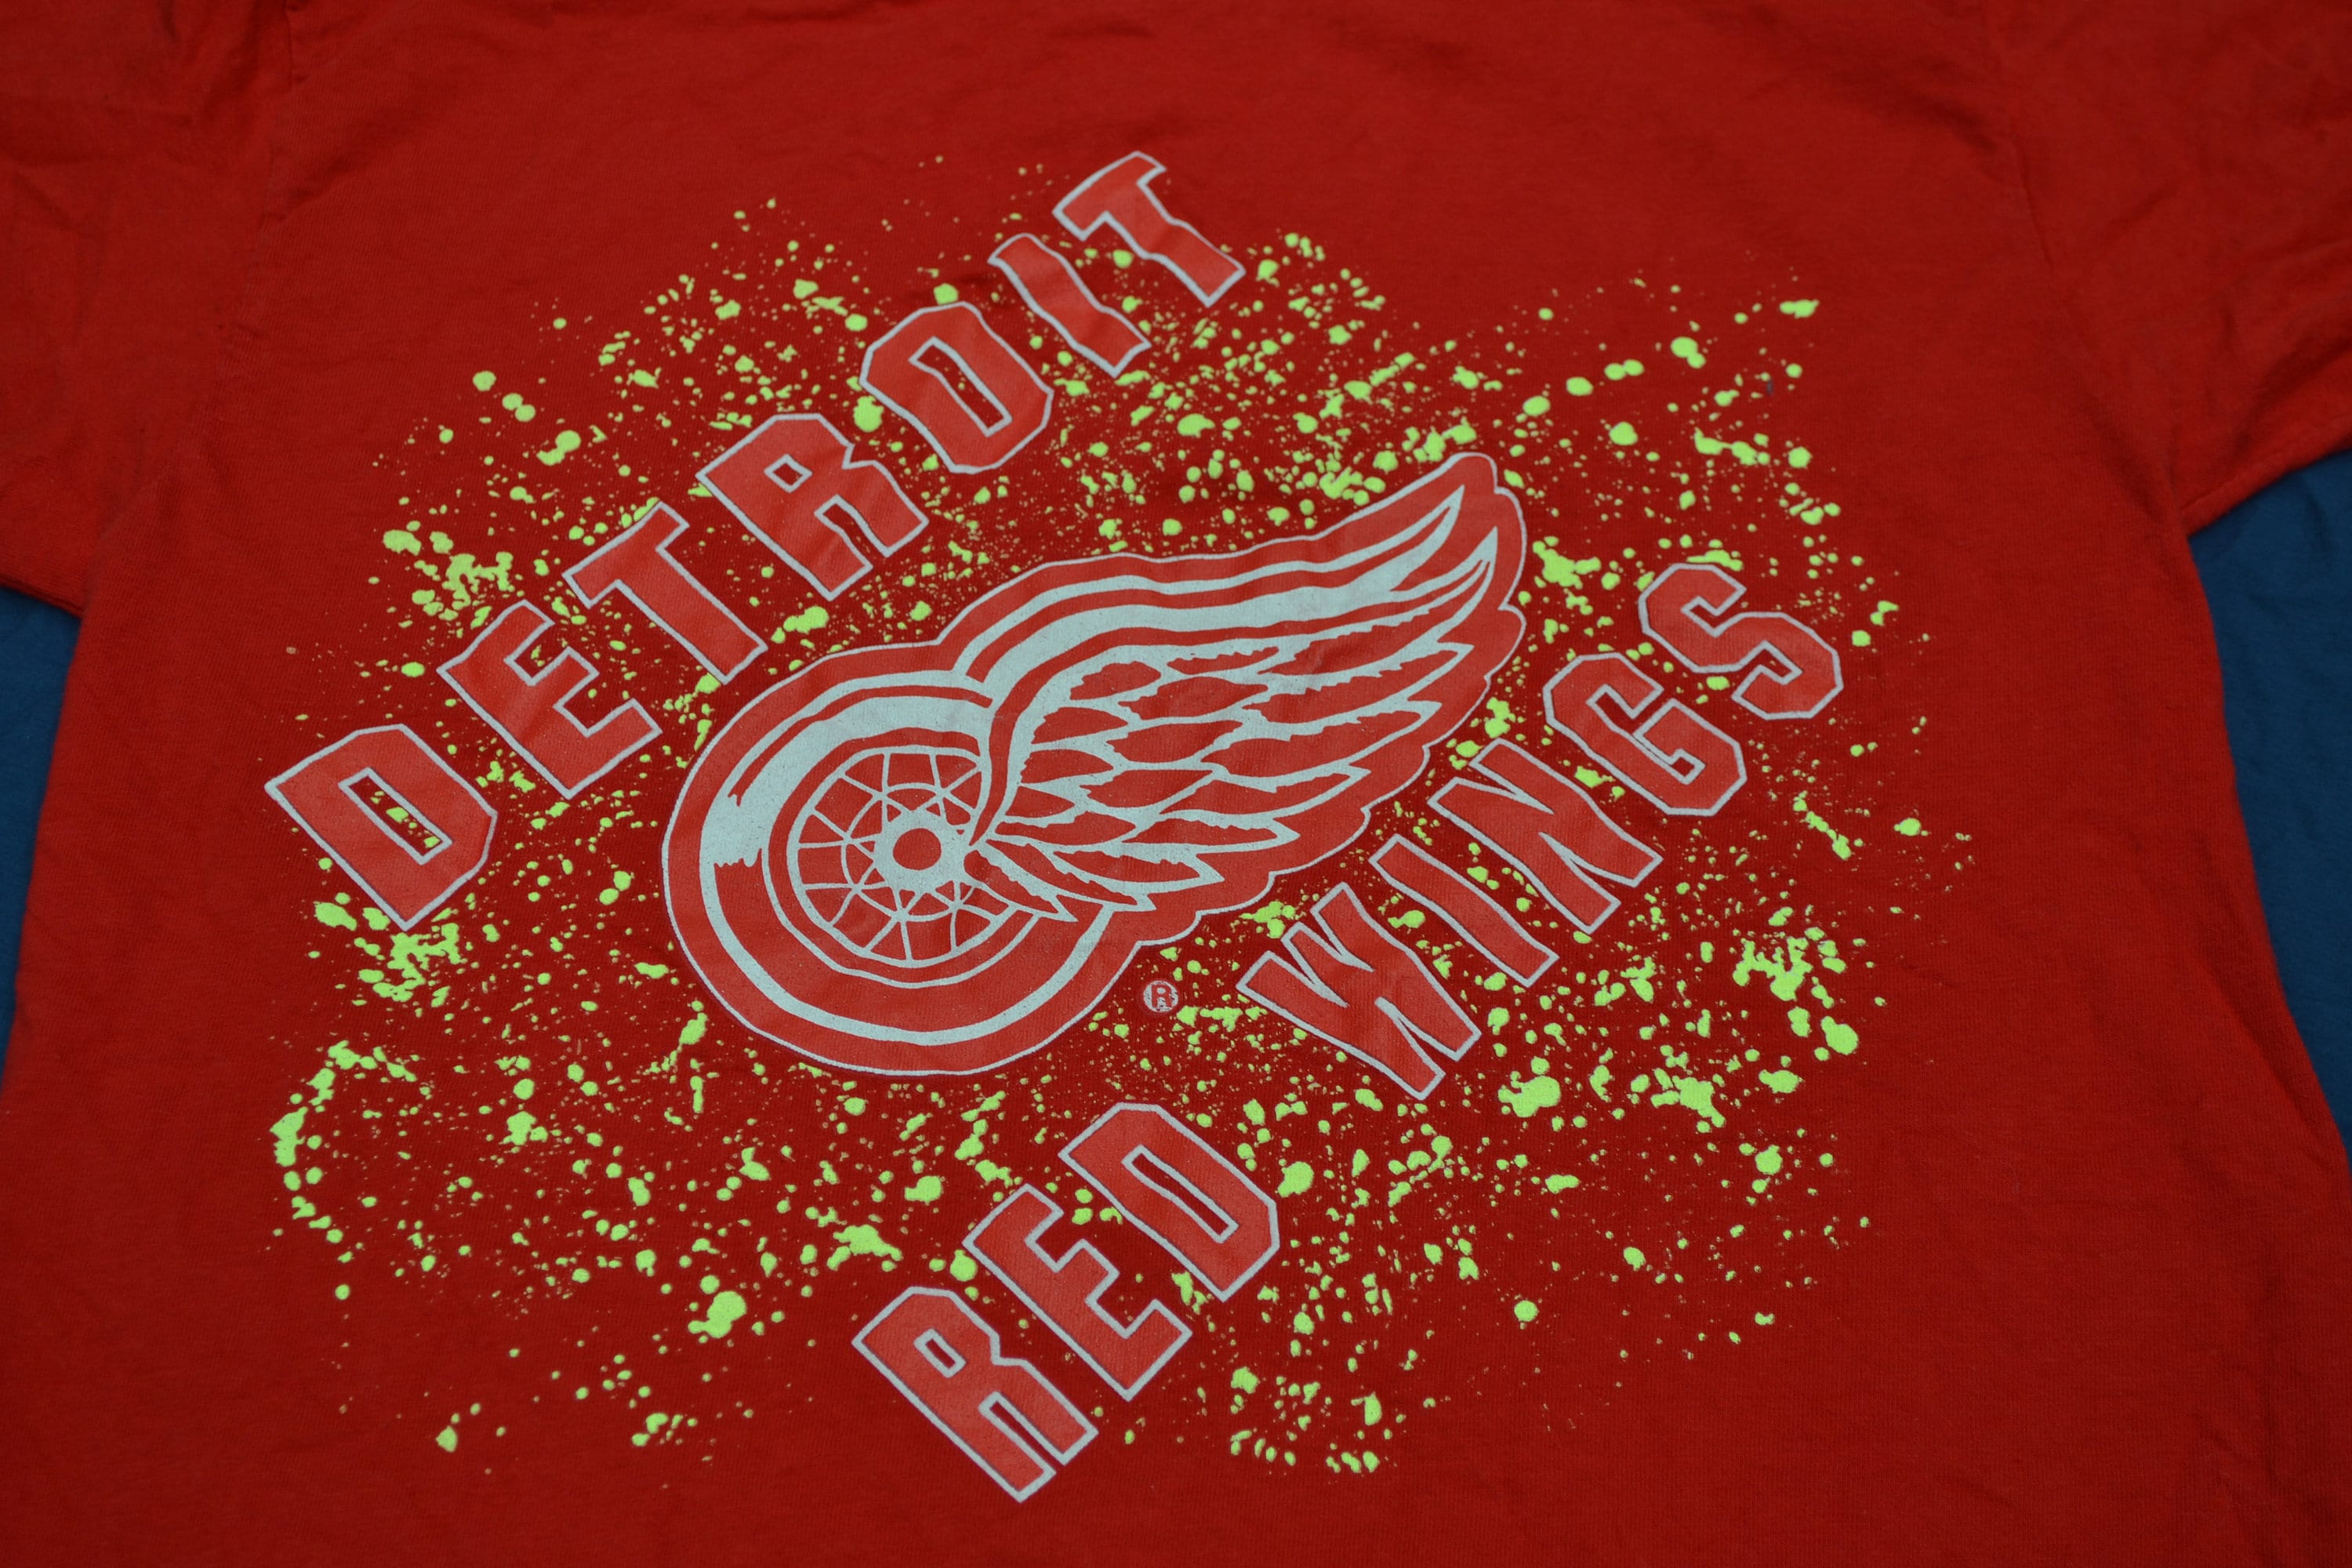 Vintage 00s Stone NHL Detroit Red Wings 2002 Stanley Cup Champions T-Shirt  - X-Large Cotton– Domno Vintage